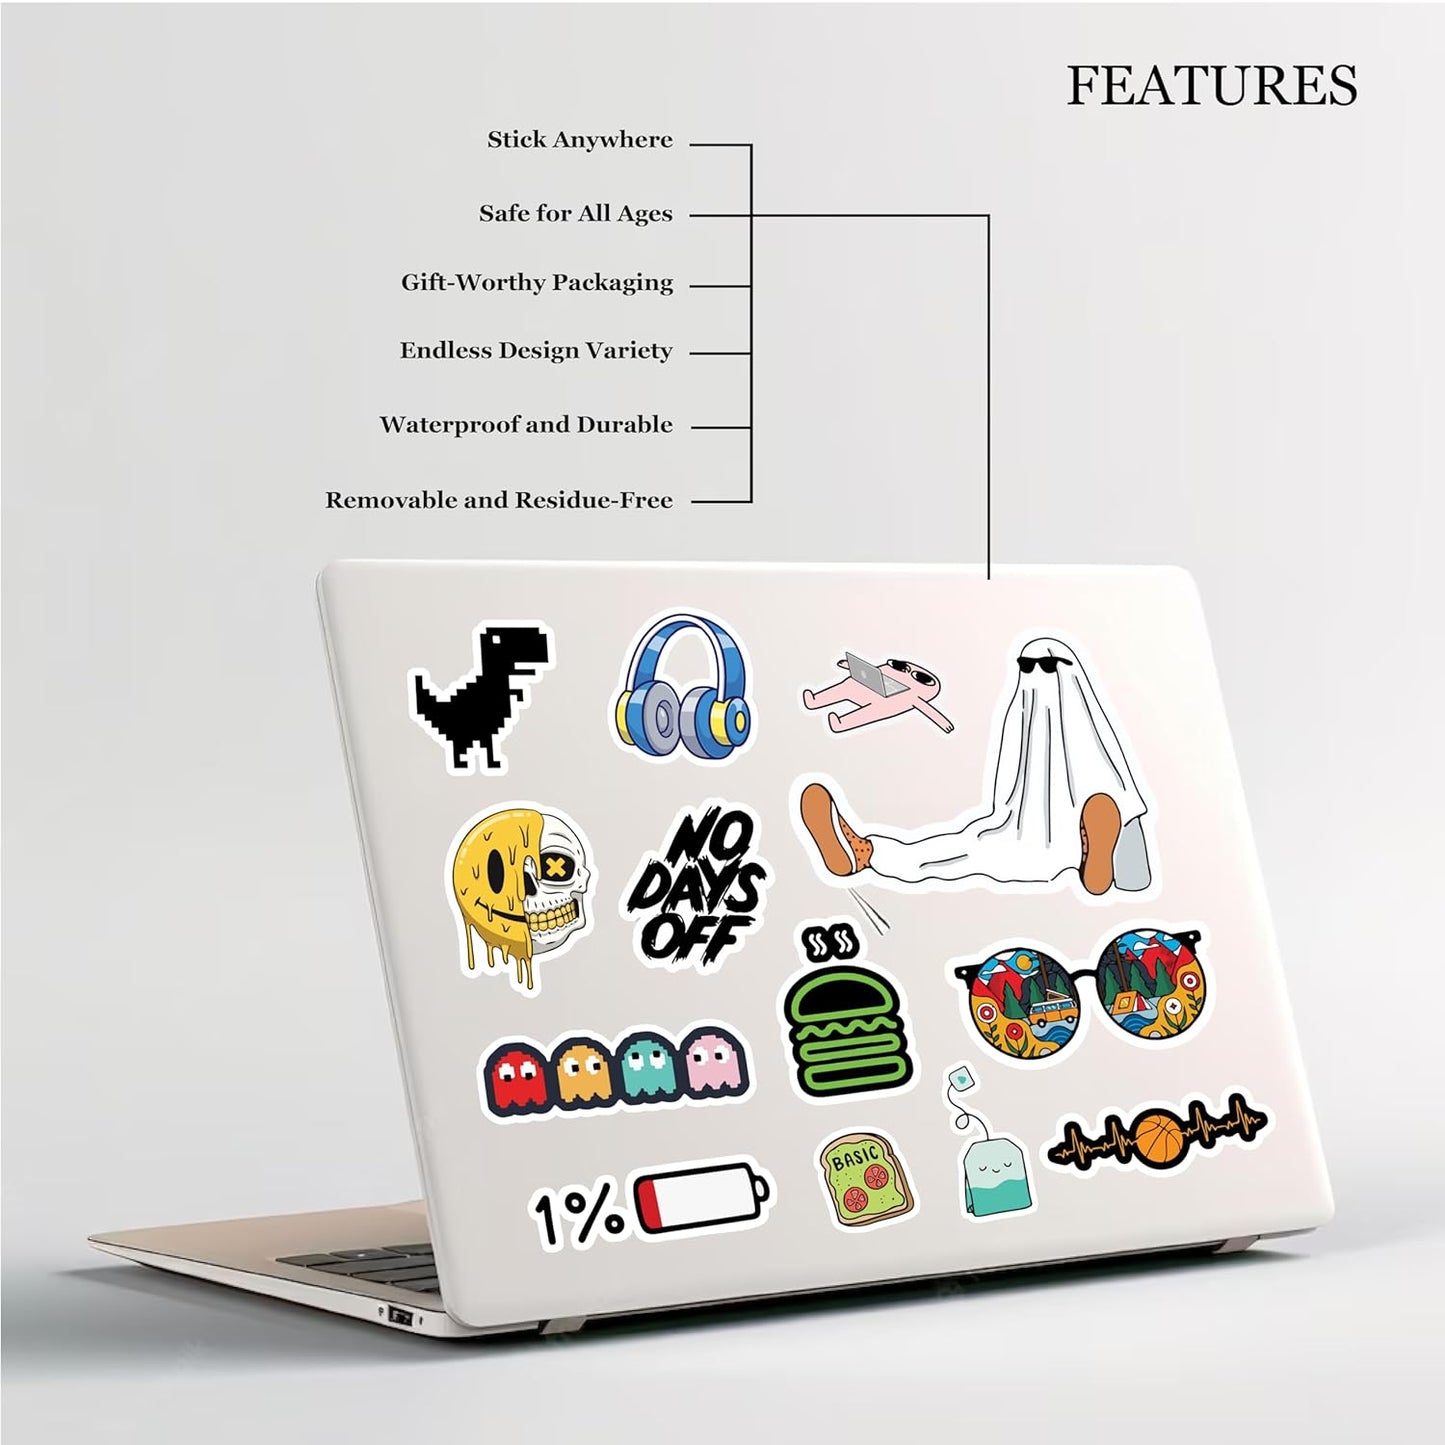 Reusable Waterproof Vinyl Stickers Glossy Finished for Decoration Laptop Mobile Scrapbook Car Bike Almira(Pack of 50)- Pack 2